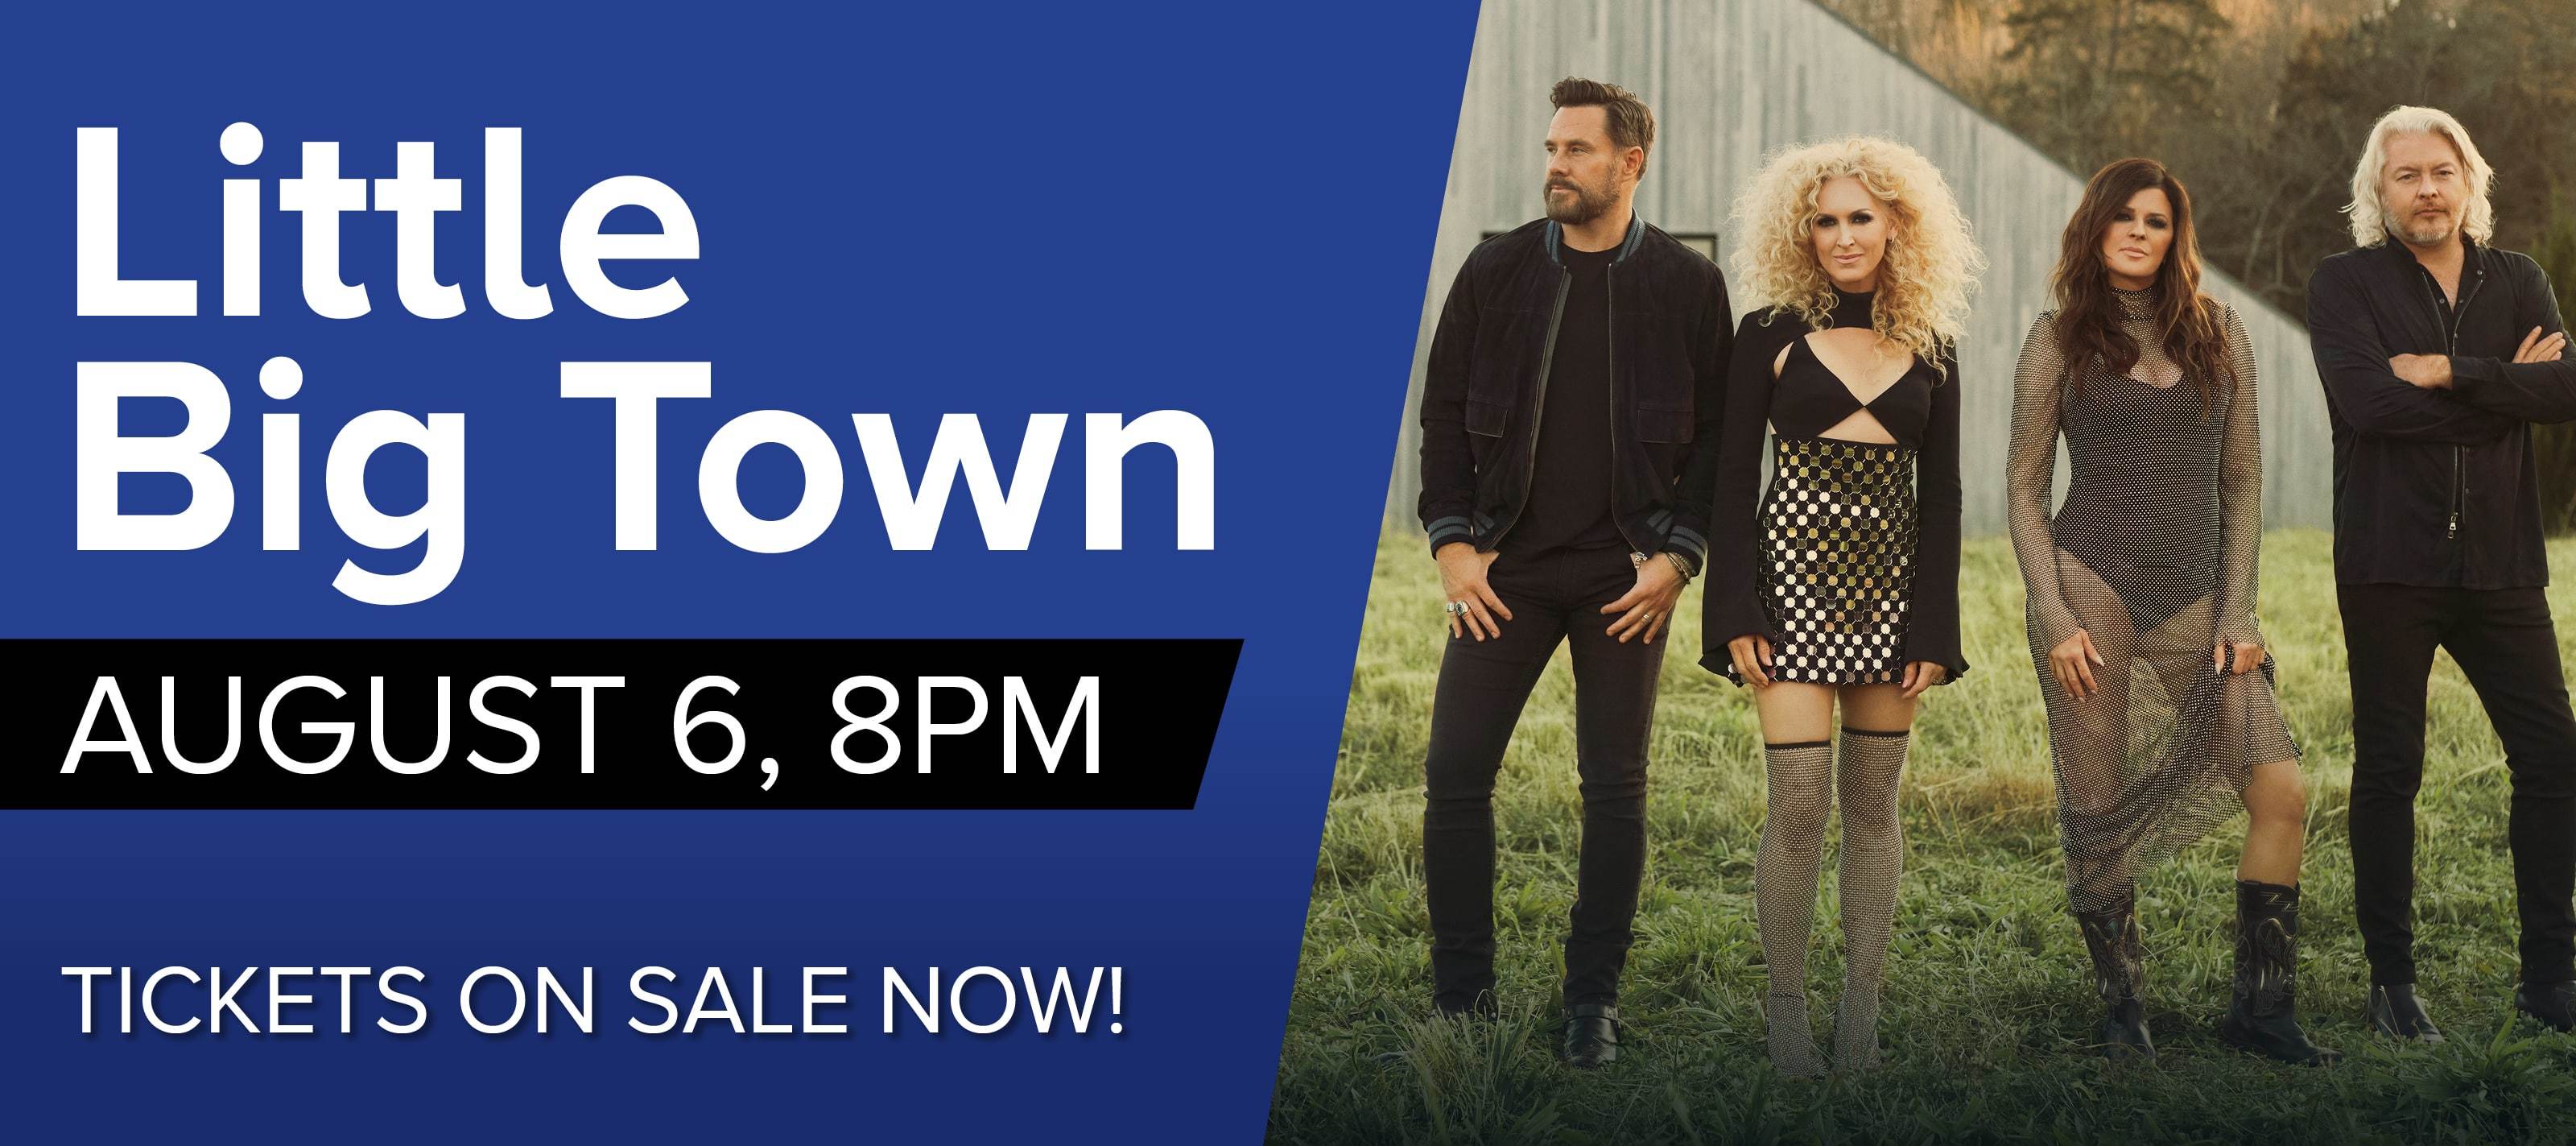 Little Big Town band photo in rural setting.  Text: Little Big Town Tickets On Sale Now. Concert on August 6 at 8pm